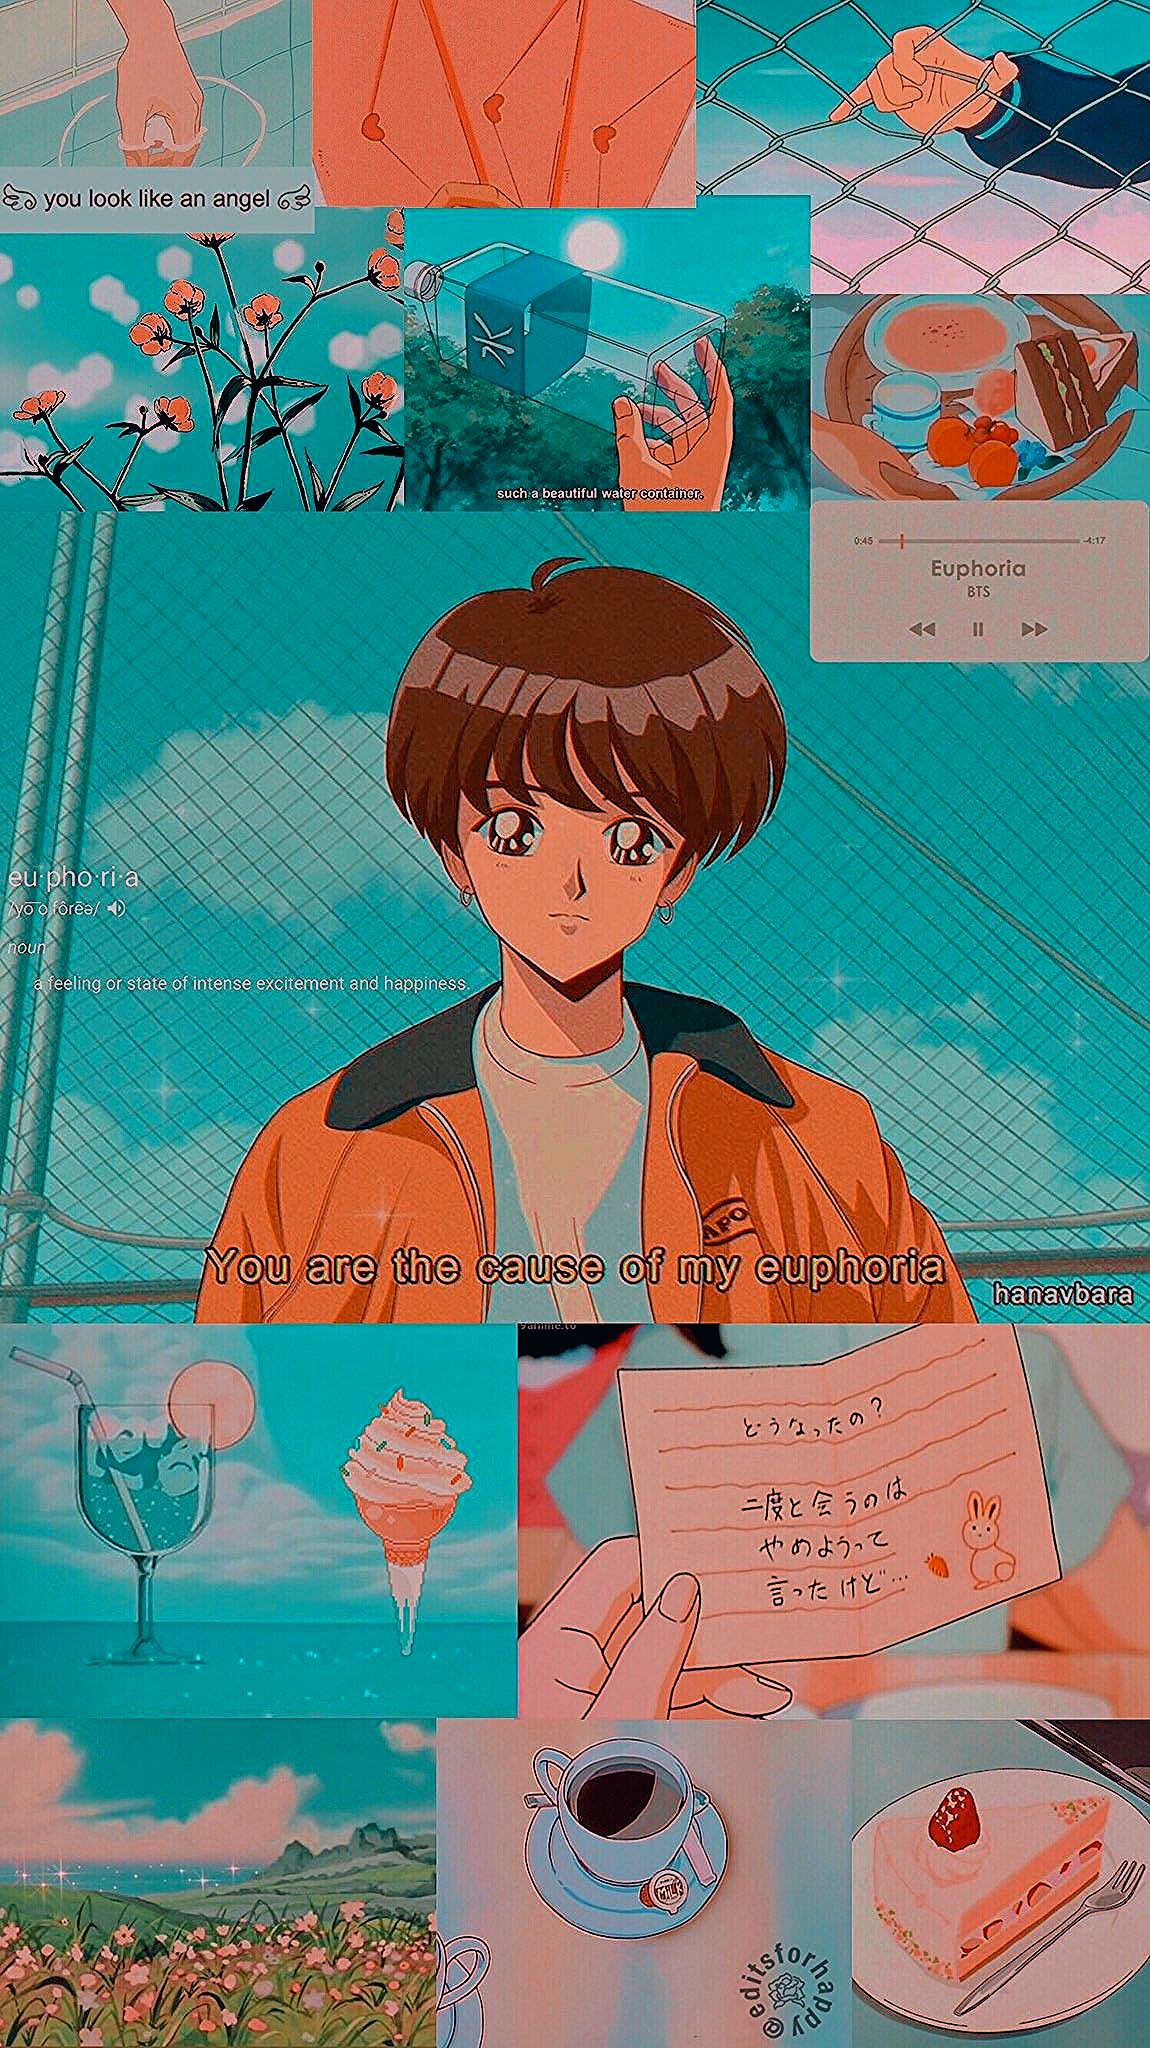 Jungkook Aesthetic Anime Wallpaper Credits To